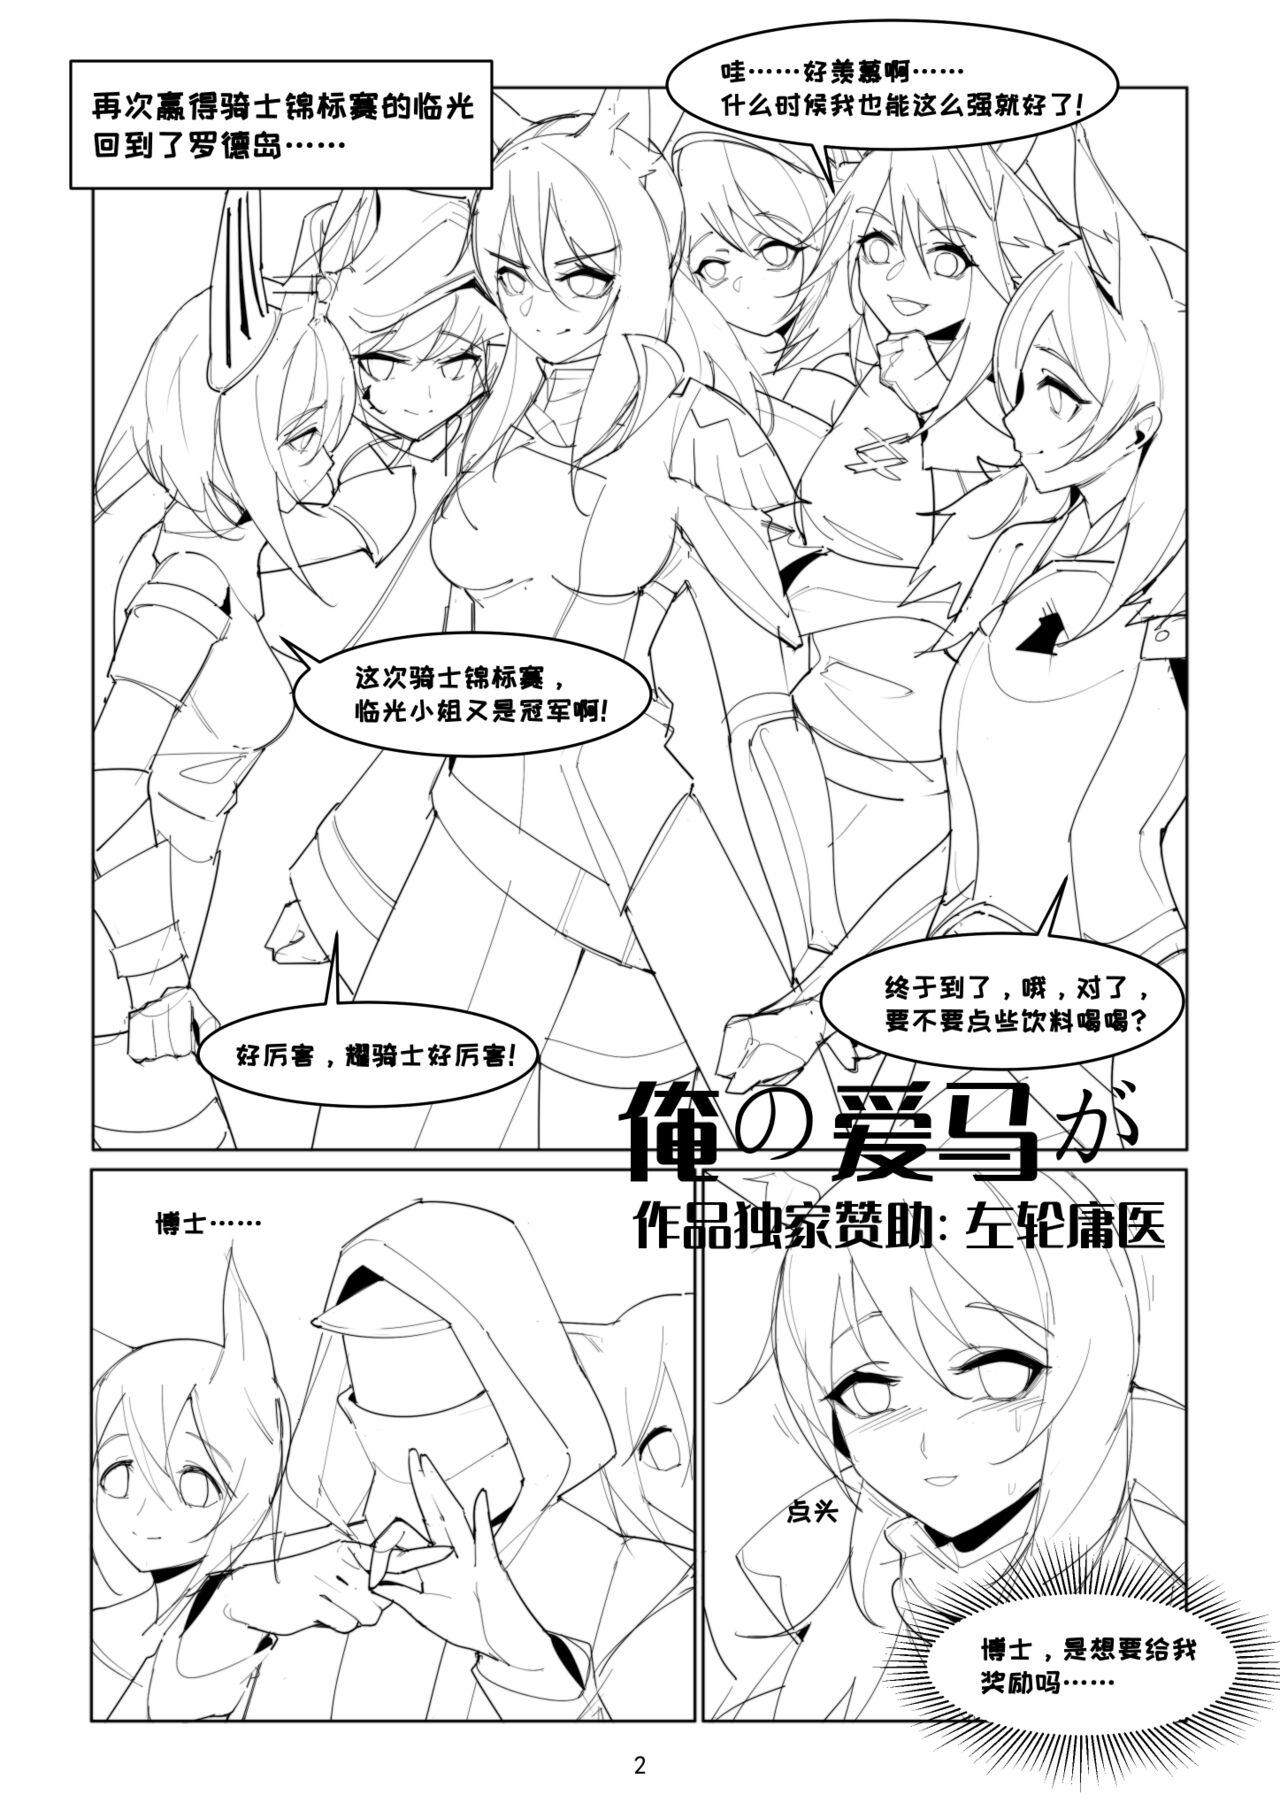 Novinha 【Tomorrow Ark】my love horse - Arknights 3some - Page 1